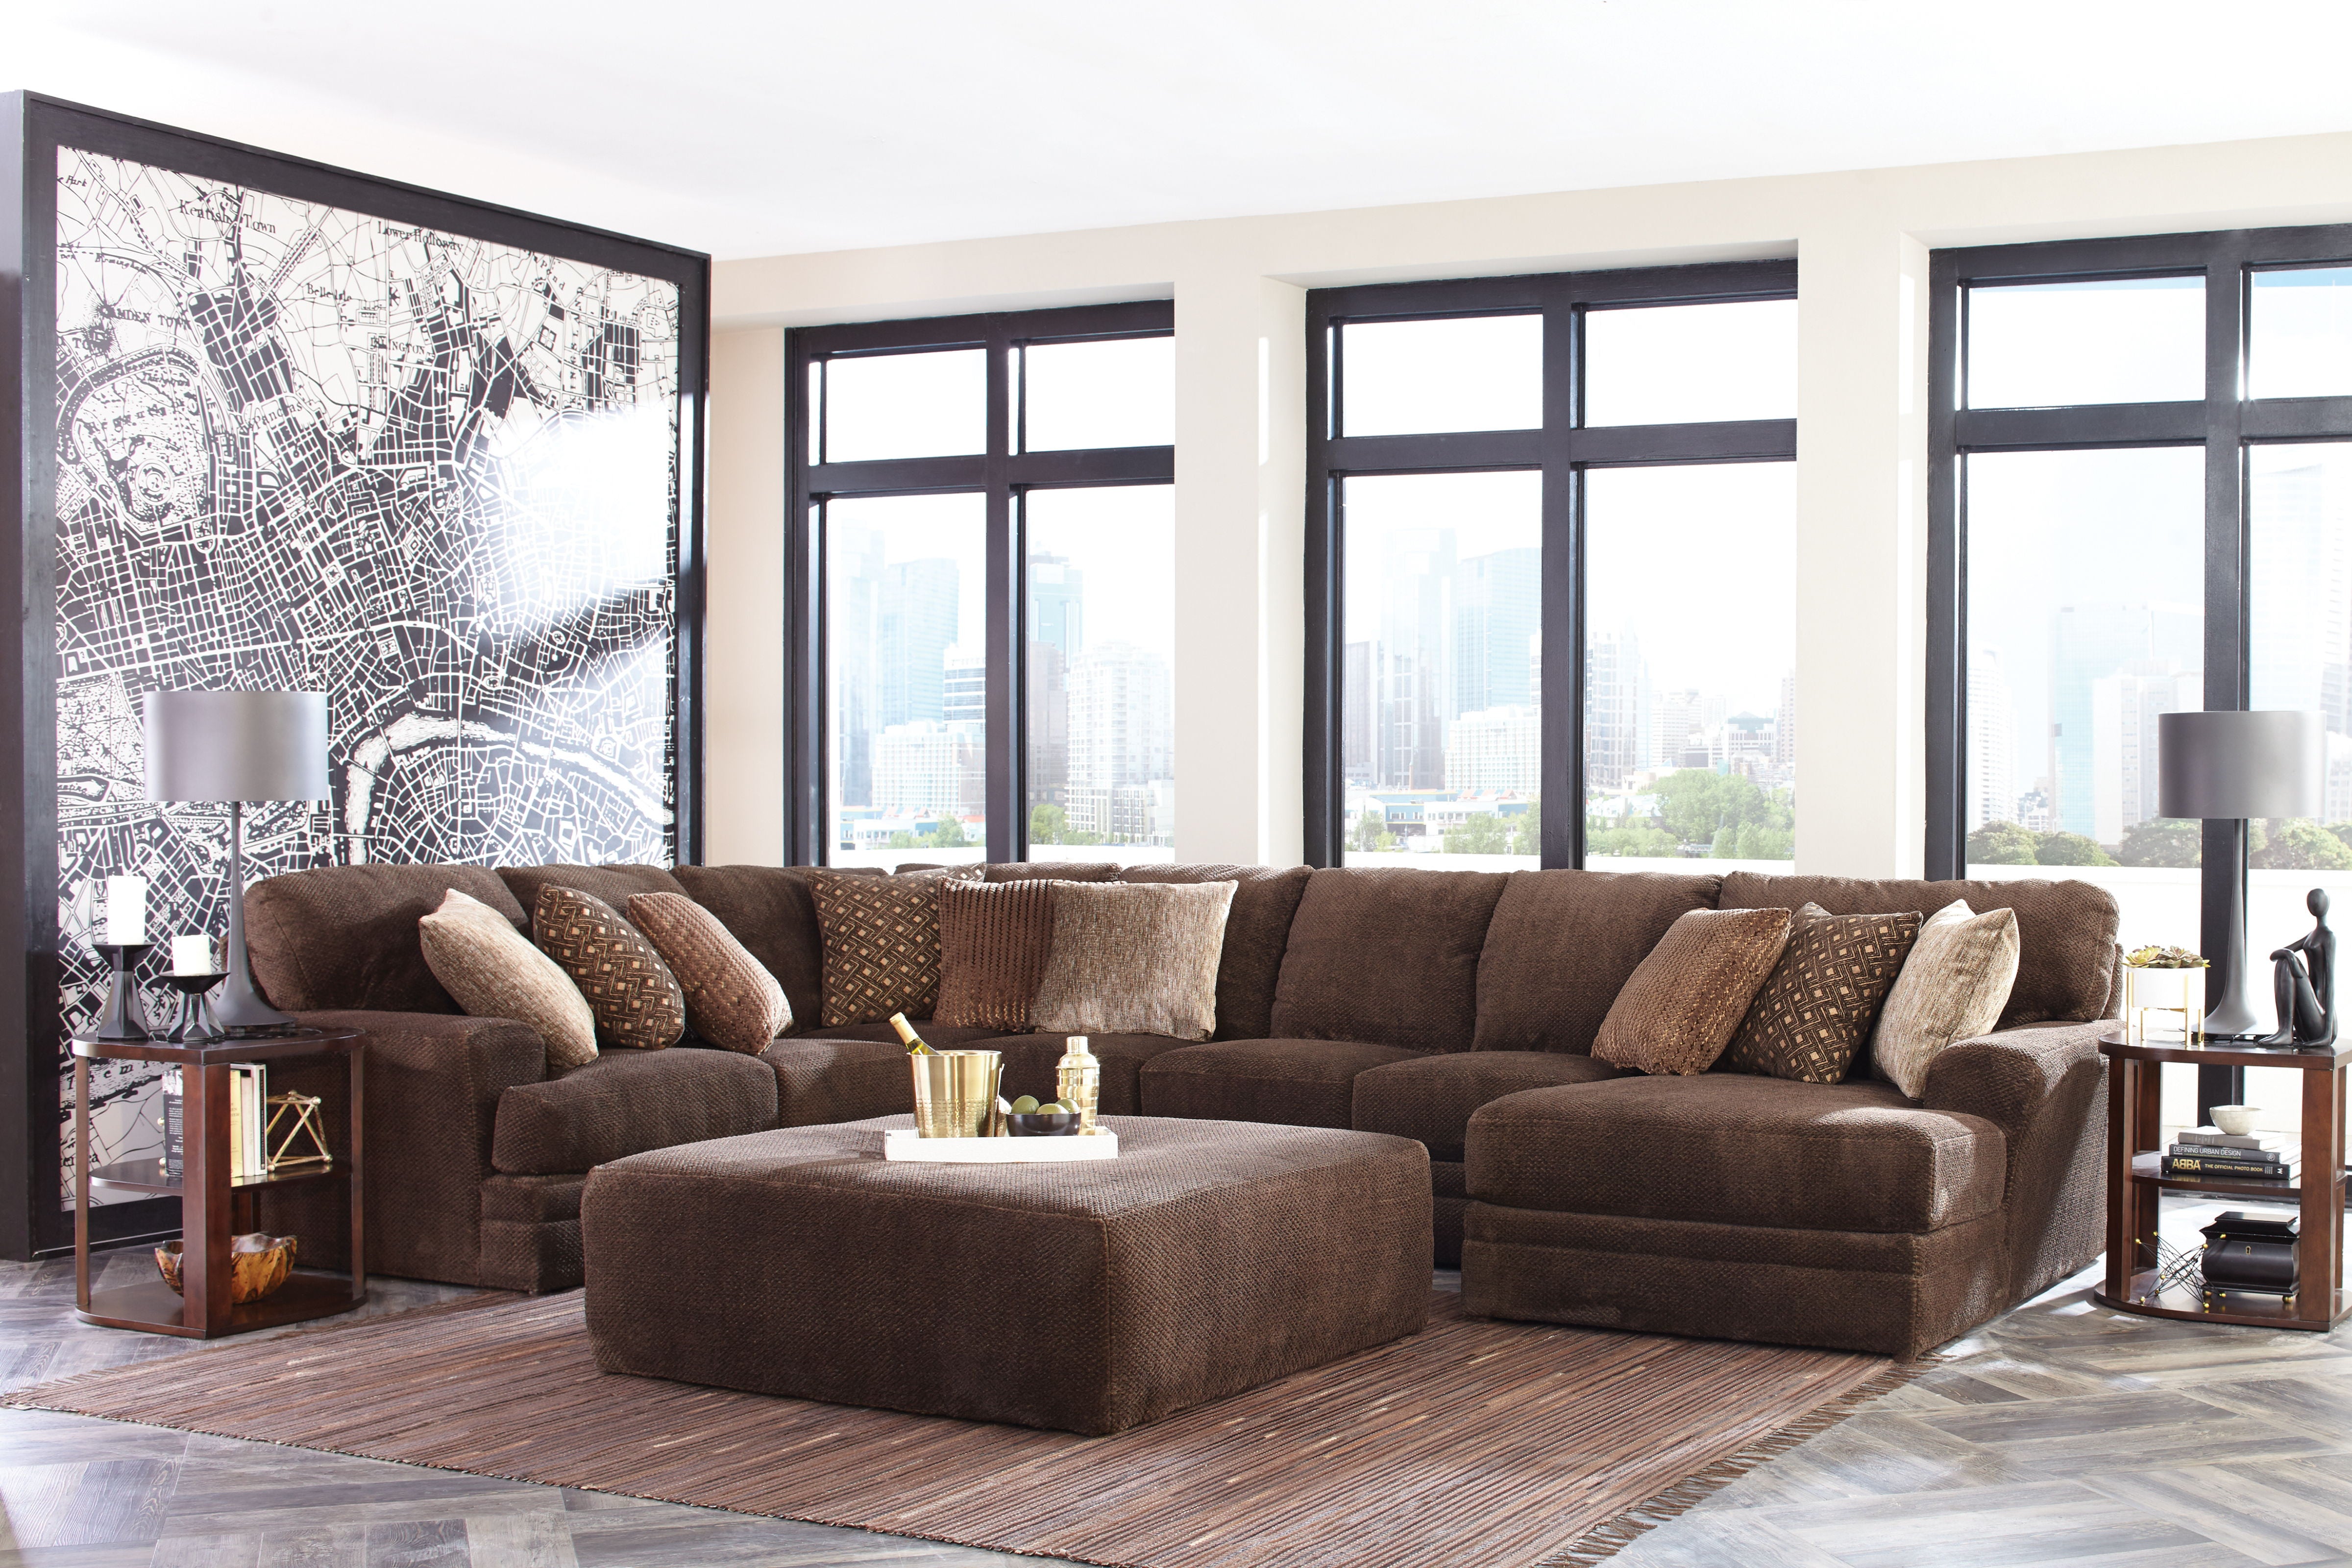 Mammoth - 3 Piece Sectional With Cocktail Ottoman (RSF Chaise) - Chocolate